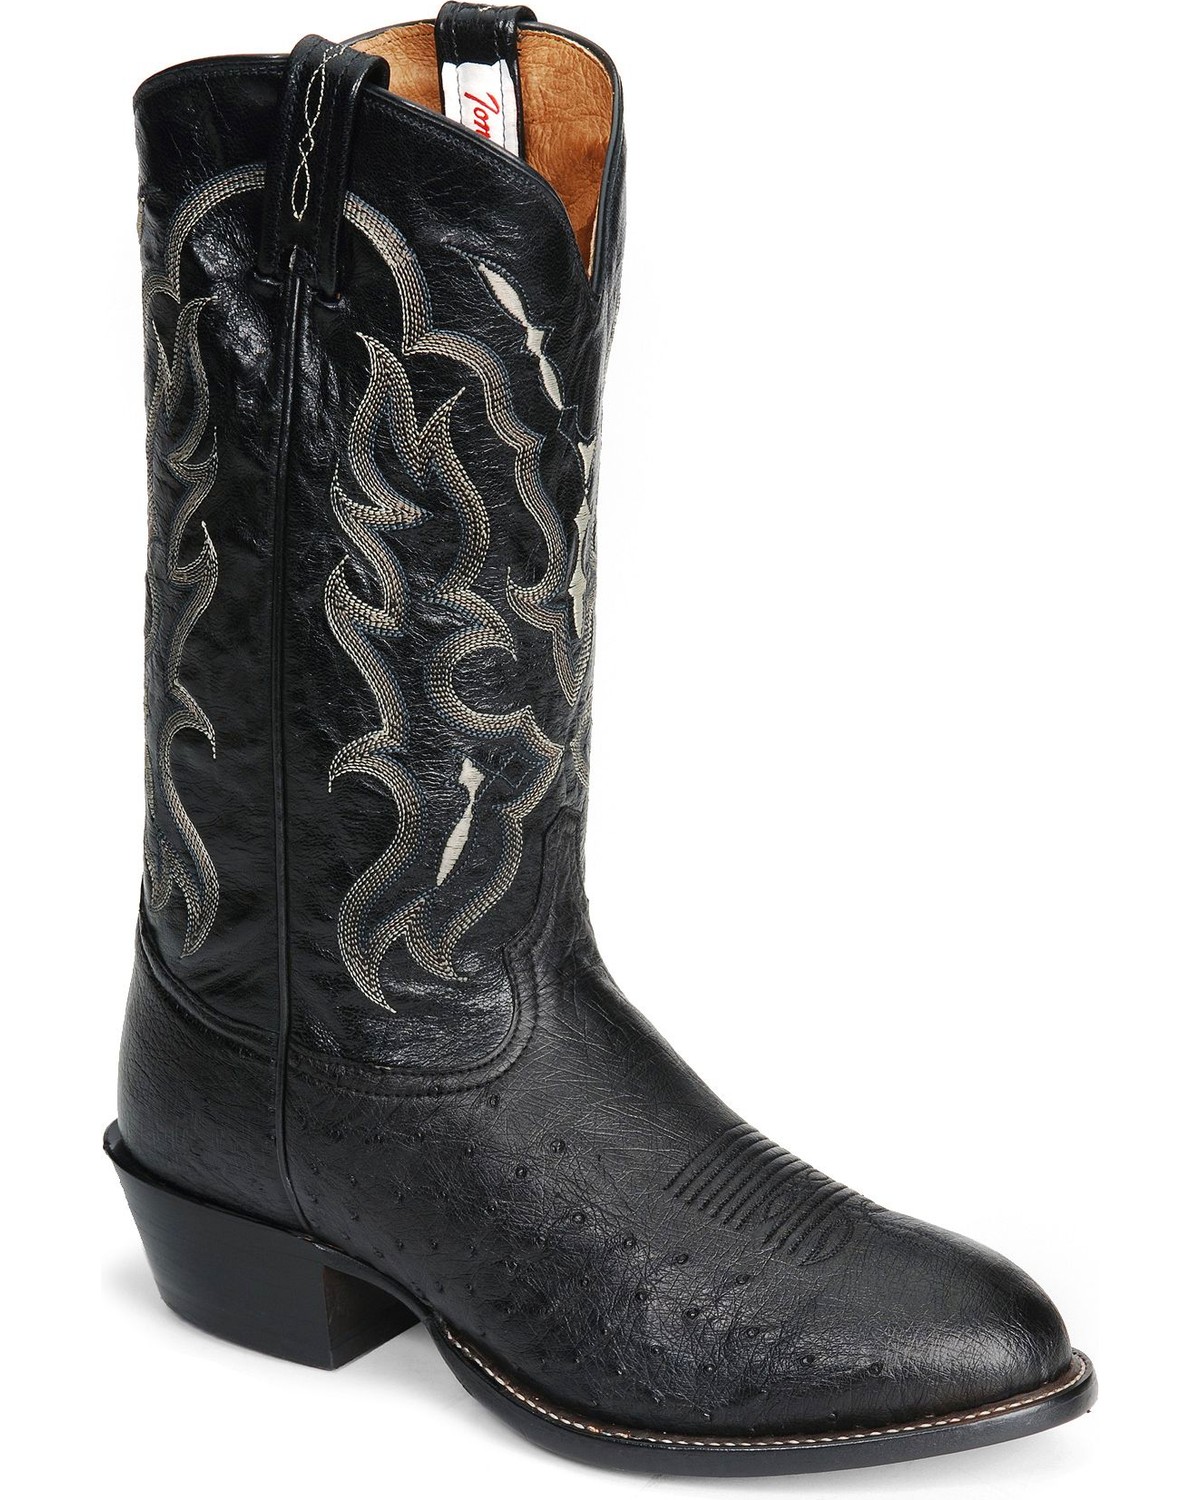 Cowboy Boots, Western Boots - Sheplers